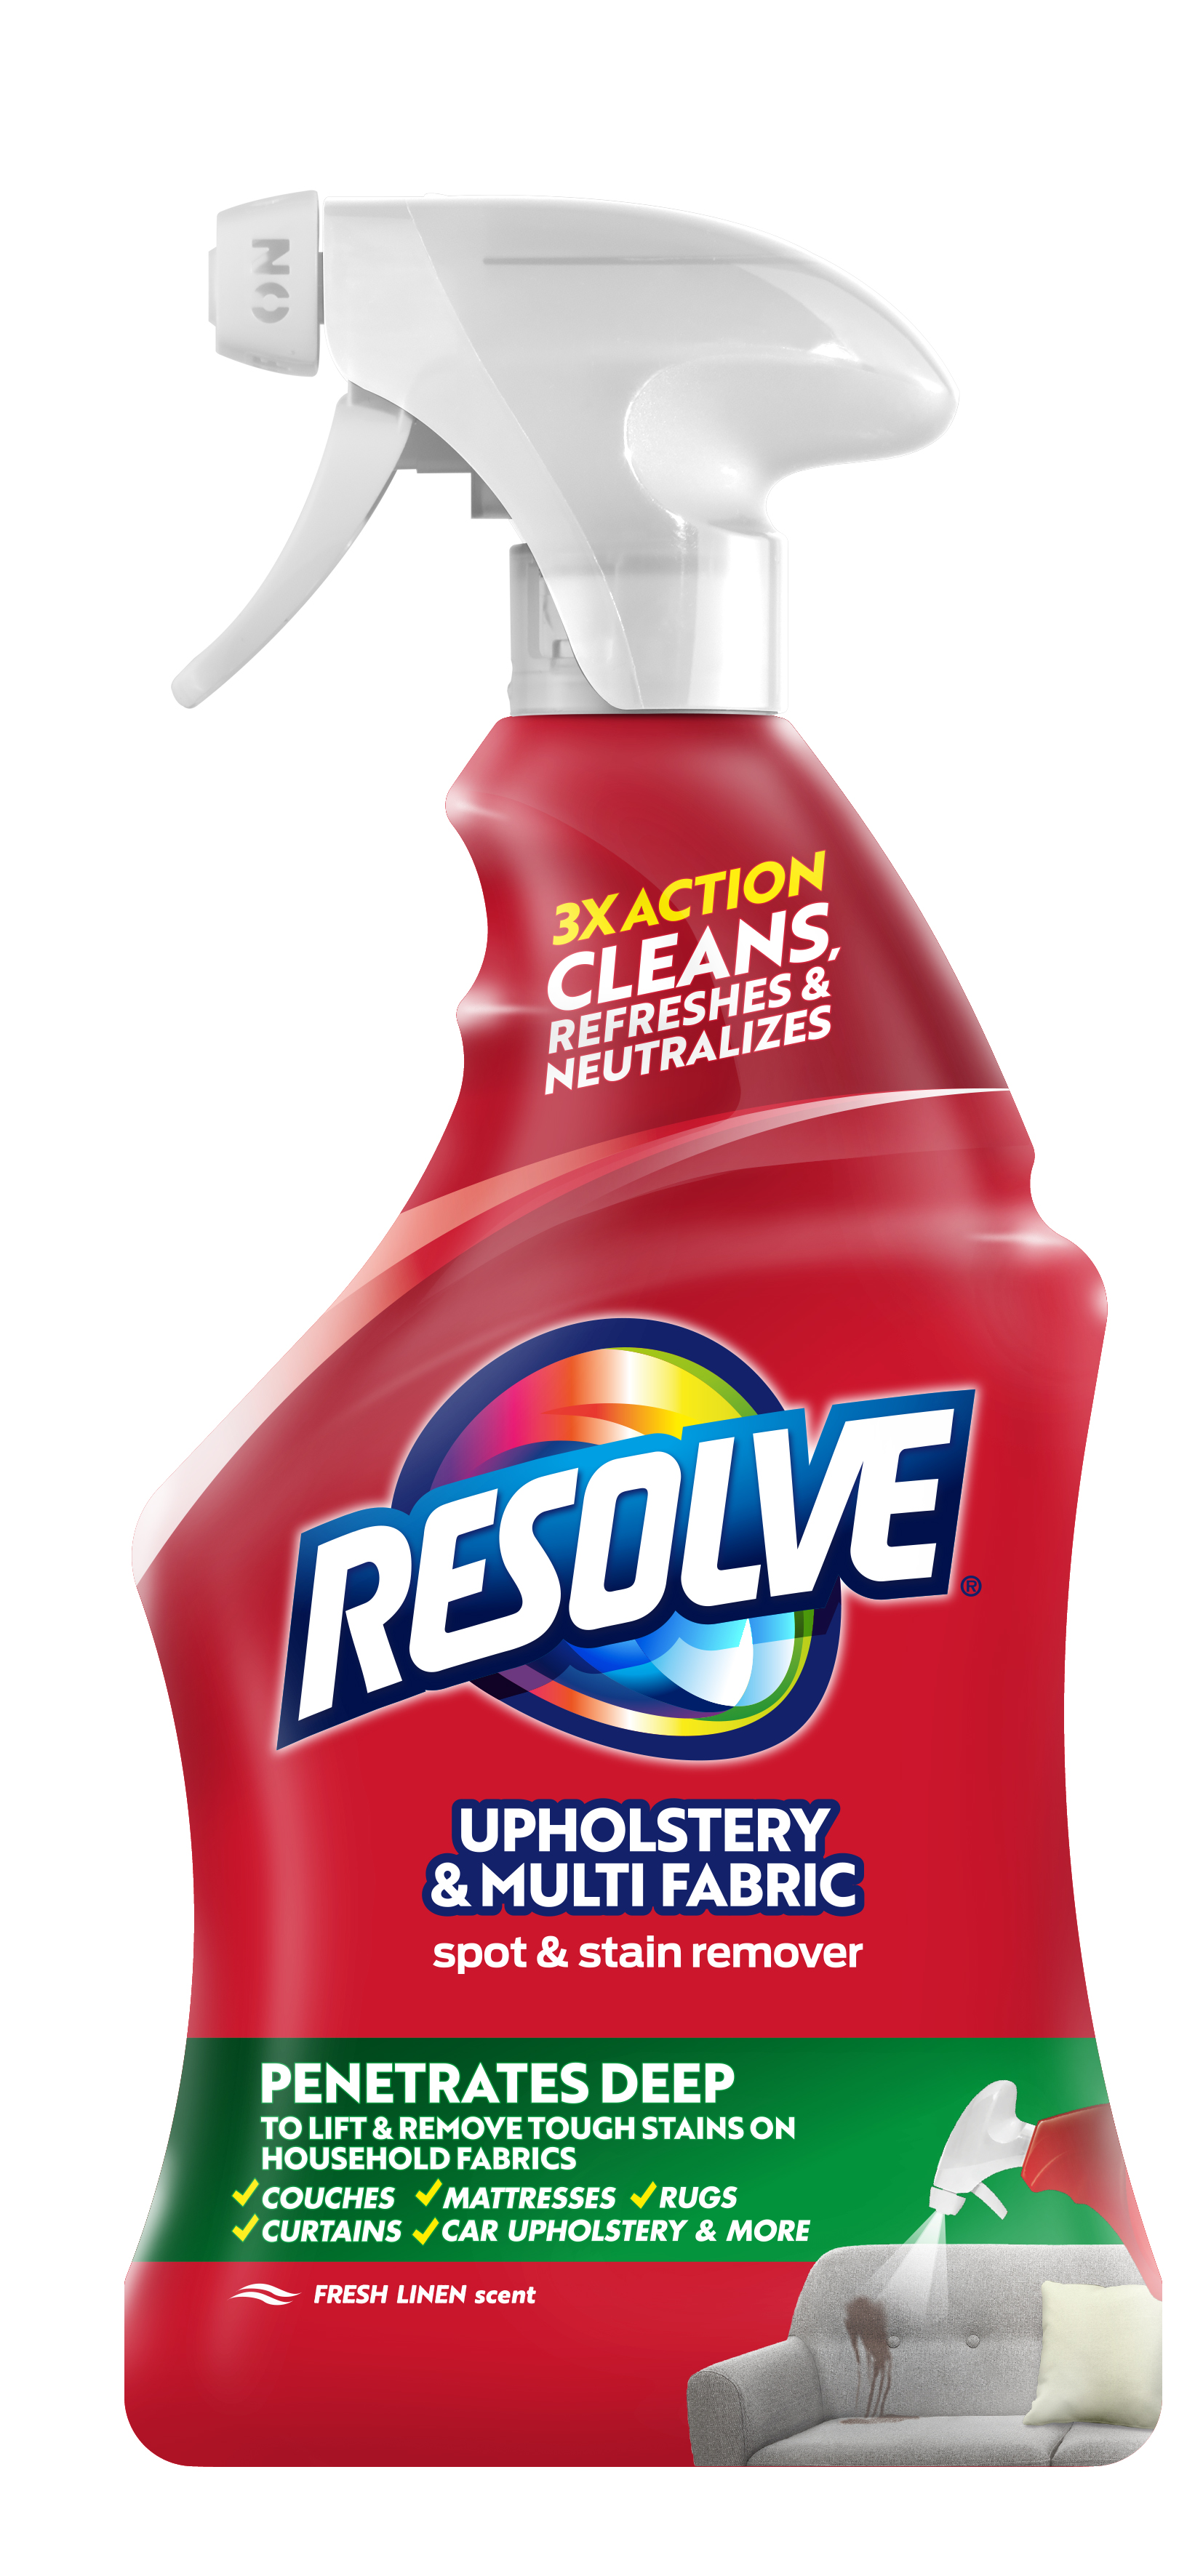 Resolve Upholstery Cleaner & Stain Remover, 22oz, Multi-Fabric Cleaner - image 1 of 7